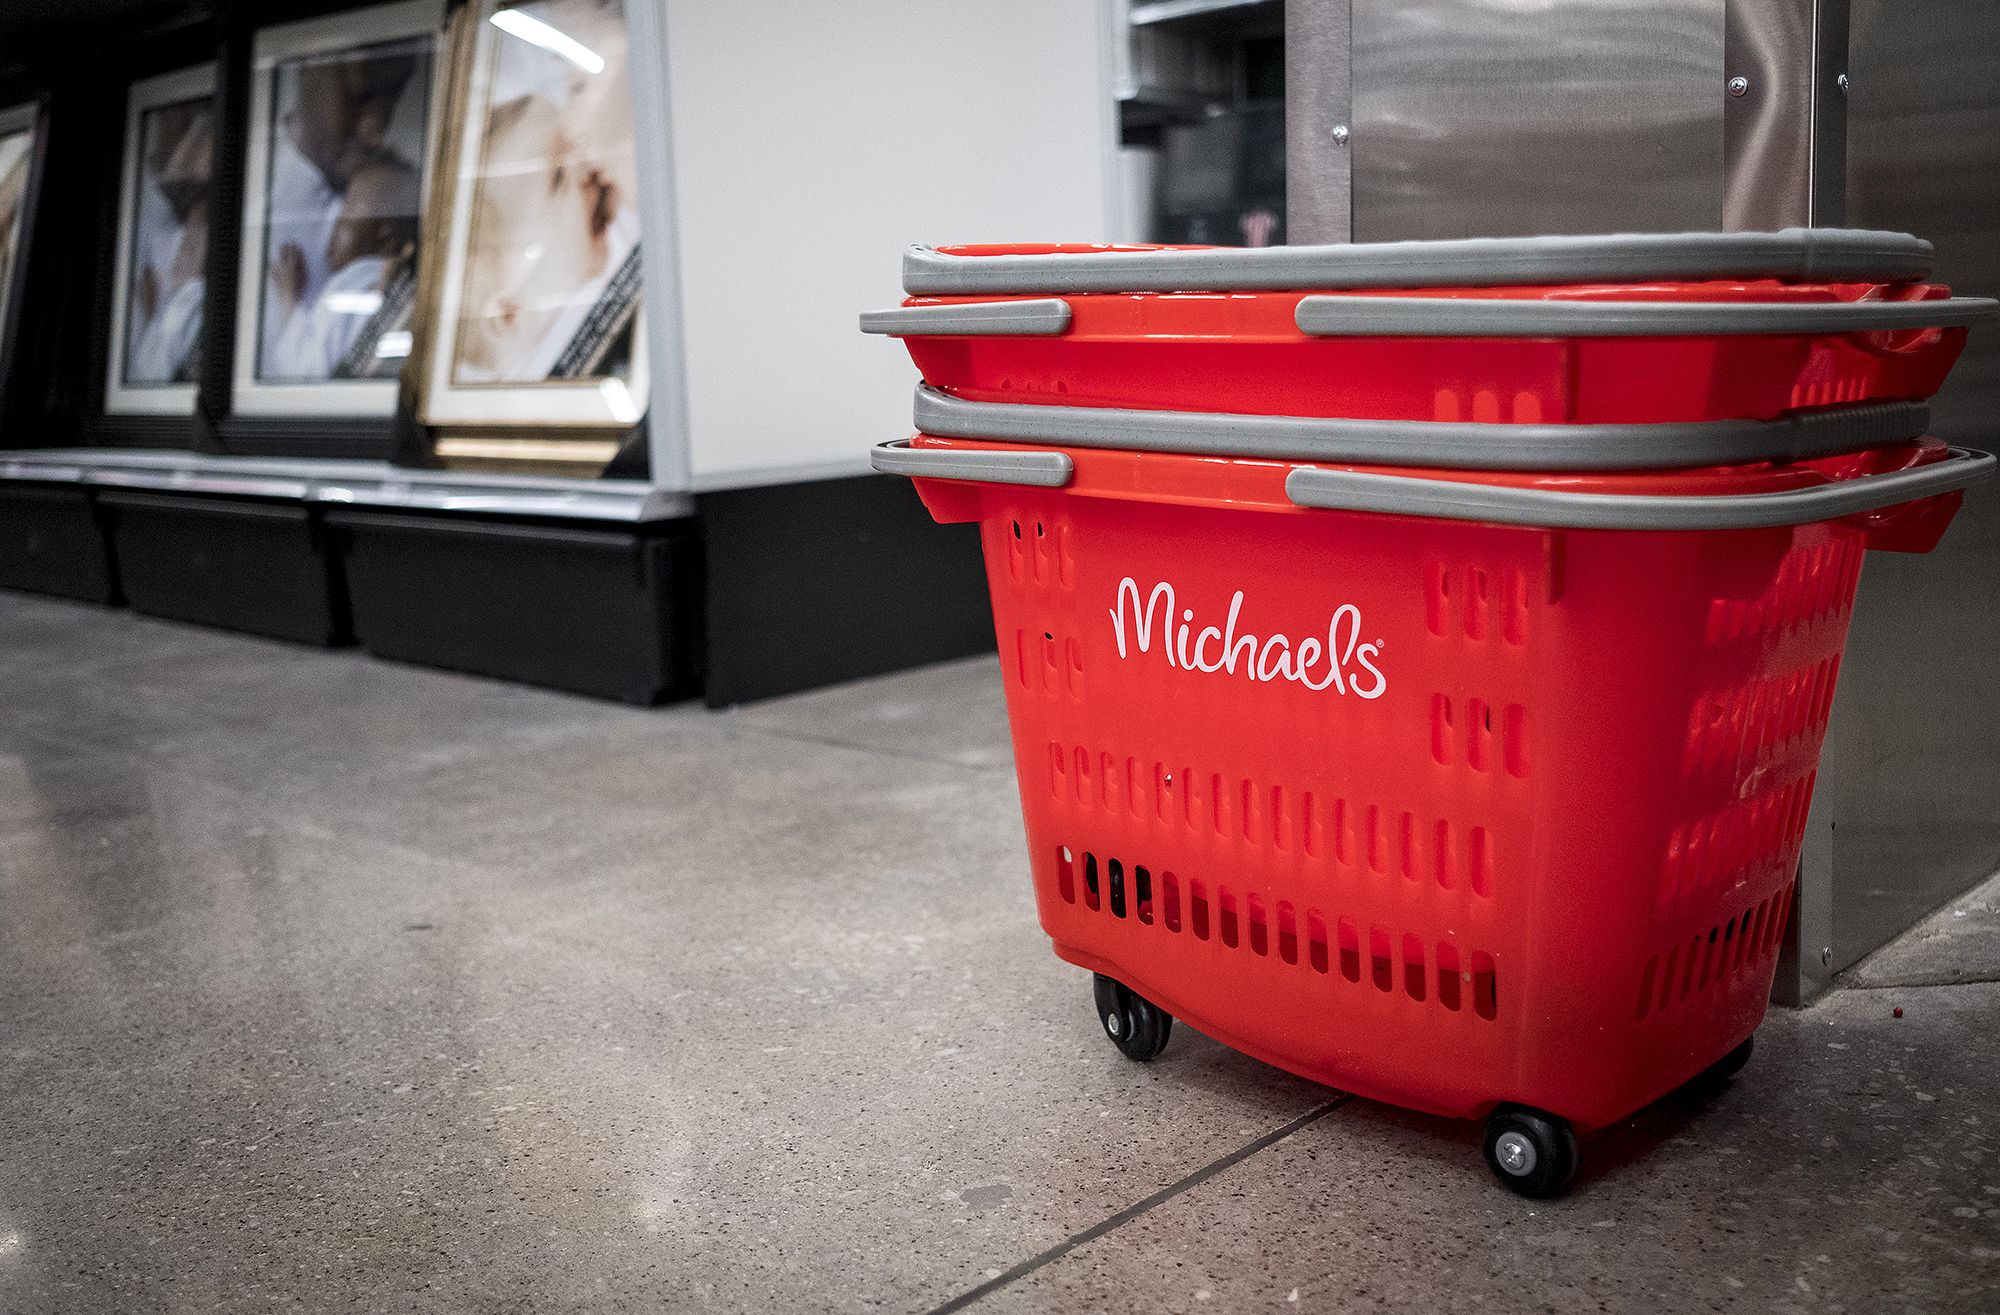 Crafts retailer Michaels will go private in $3.3 billion deal